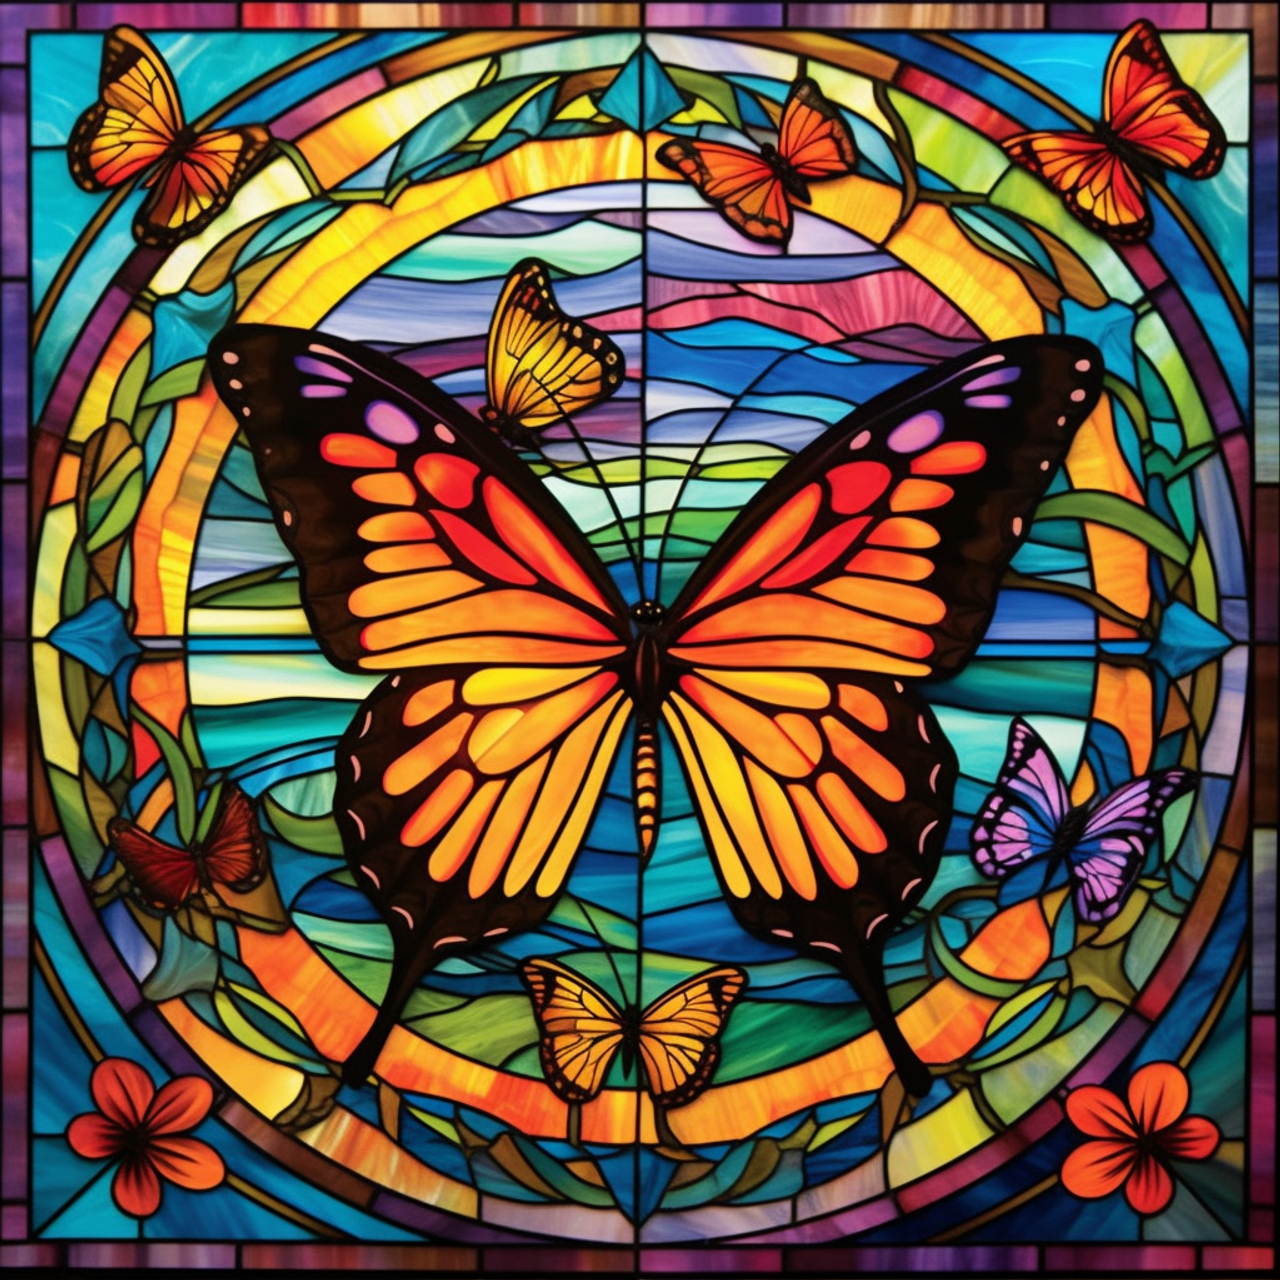 STAINED GLASS BUTTERFLY Diamond Painting Kit